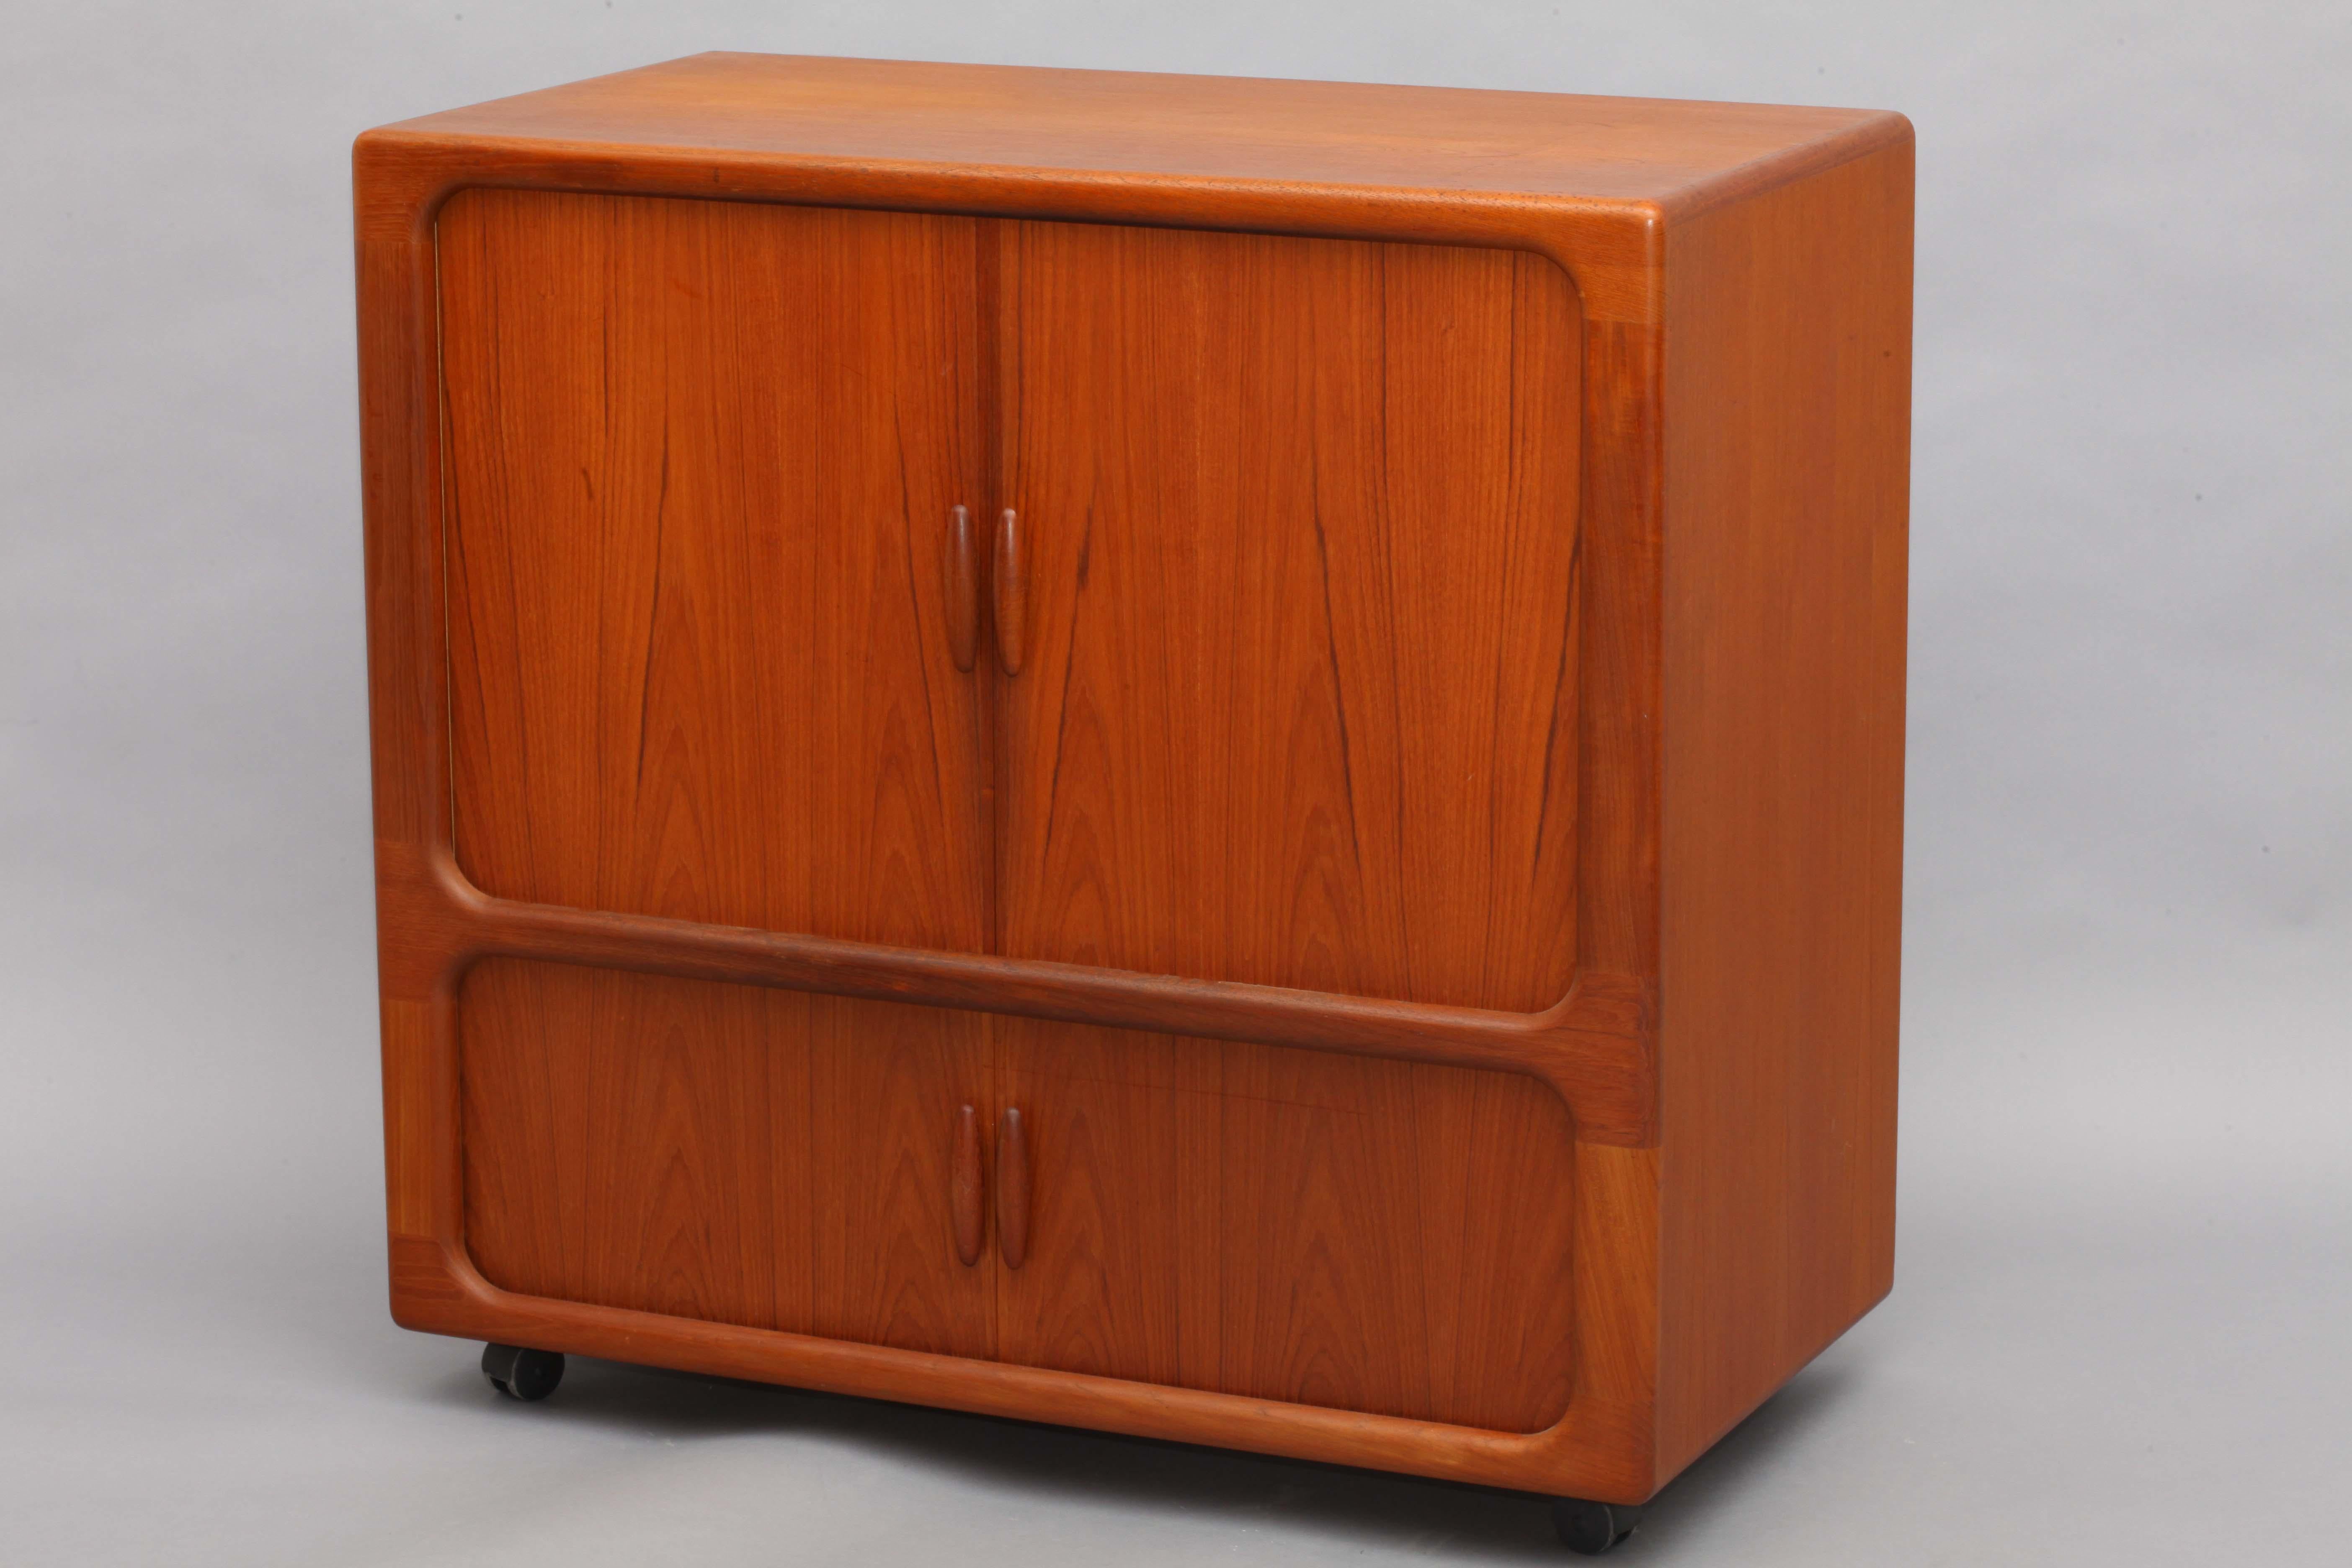 High quality high board with sliding doors for TV and Hifi,
solid teak wood,
Manufacture: Dyrlund,
Denmark, 1970.